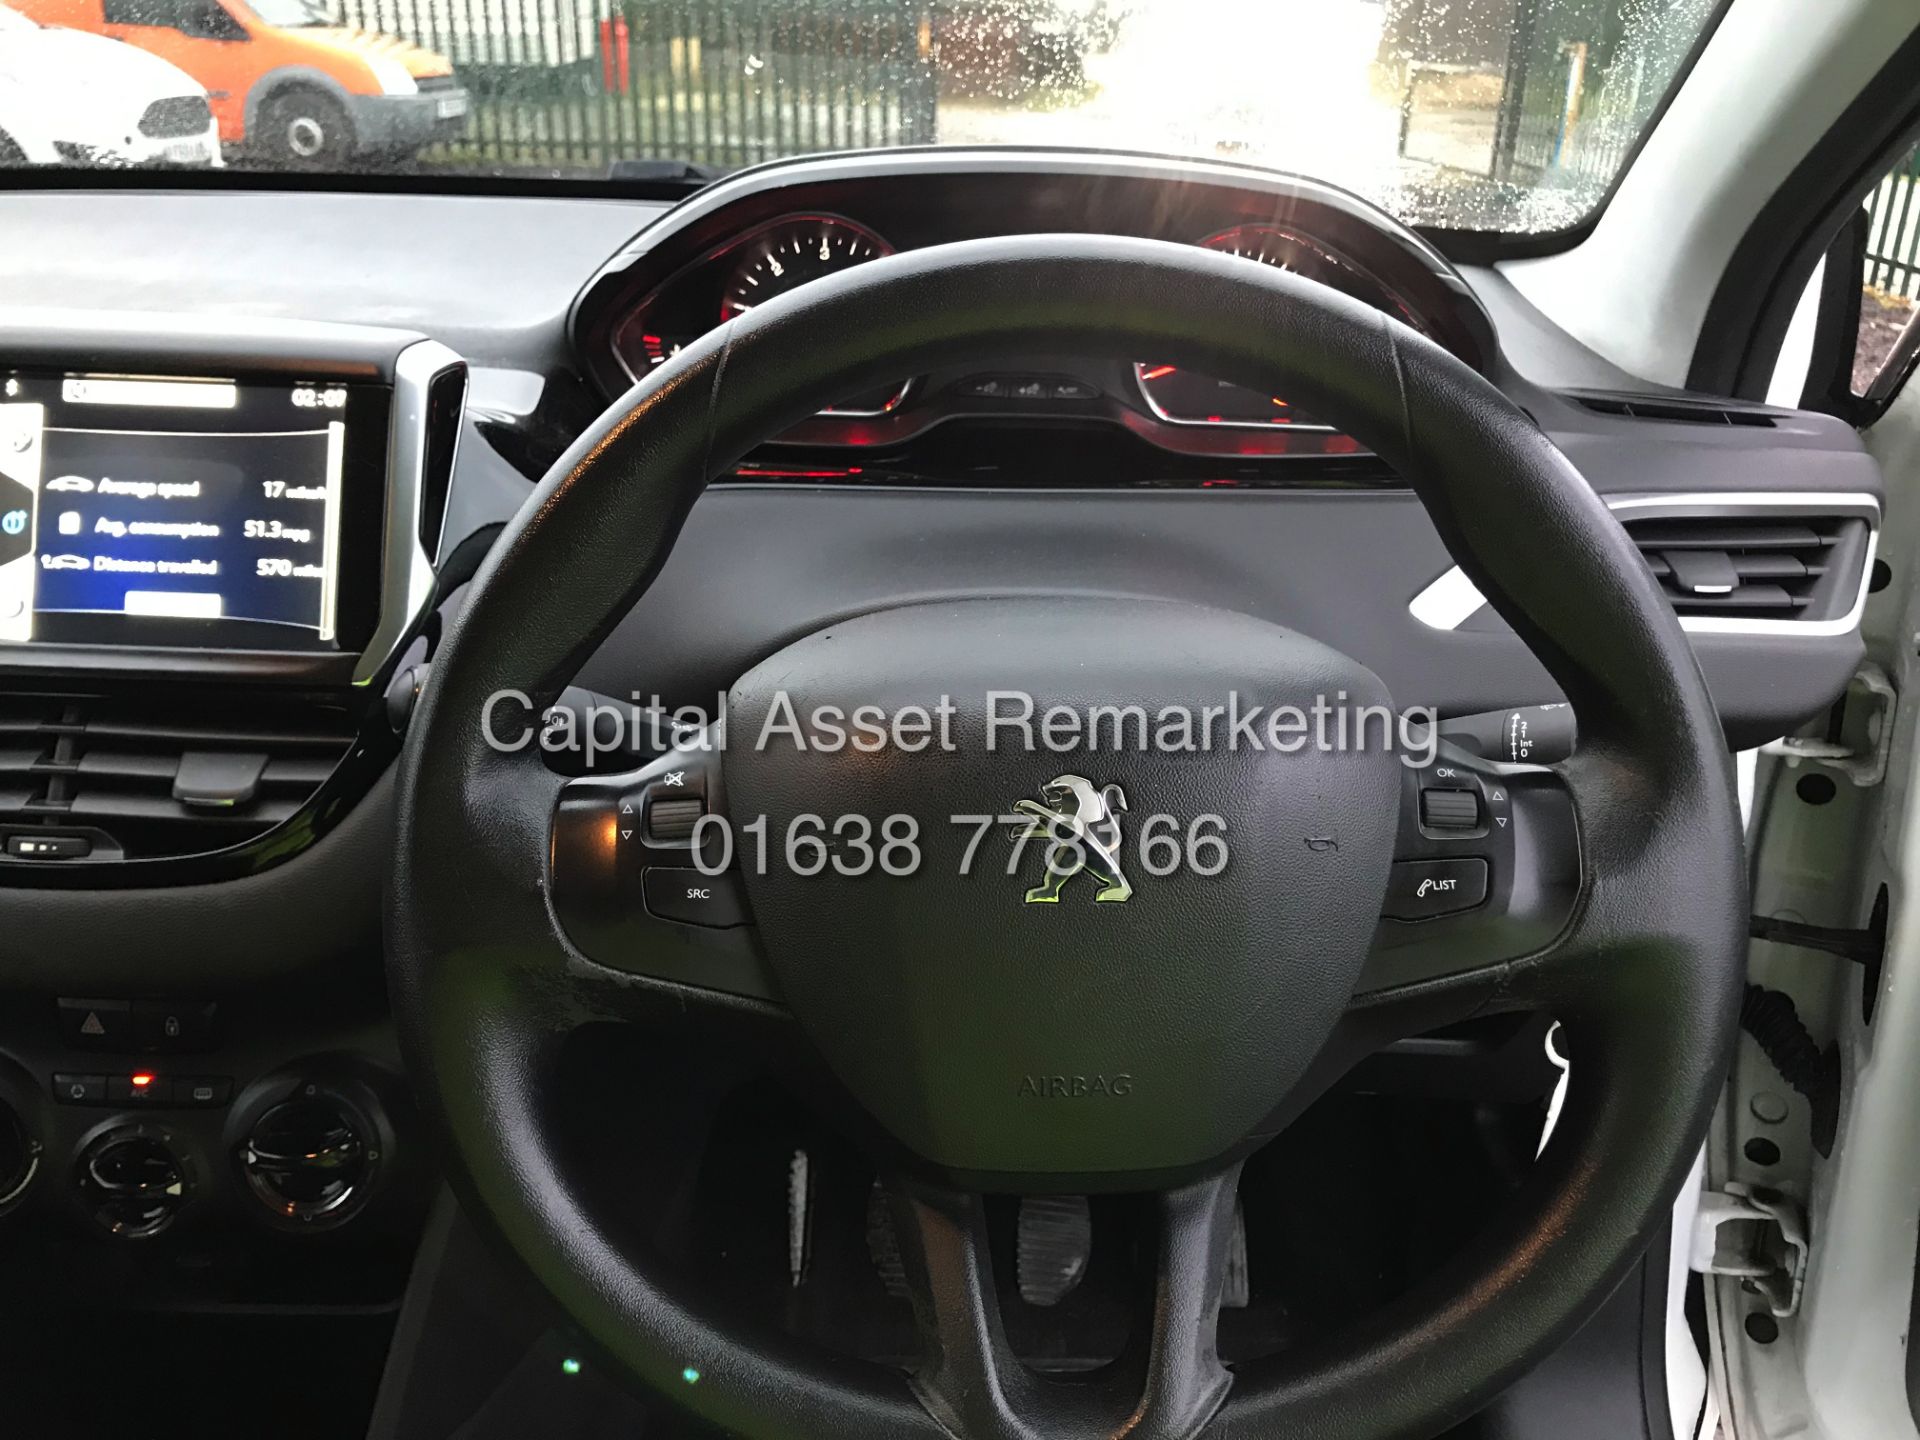 (ON SALE) PEUGEOT 208 1.4HDI "ACTIVE" 1 PREVIOUS KEEPER FSH (14 REG) RECENT SERVICE-AIR CON *NO VAT* - Image 16 of 23